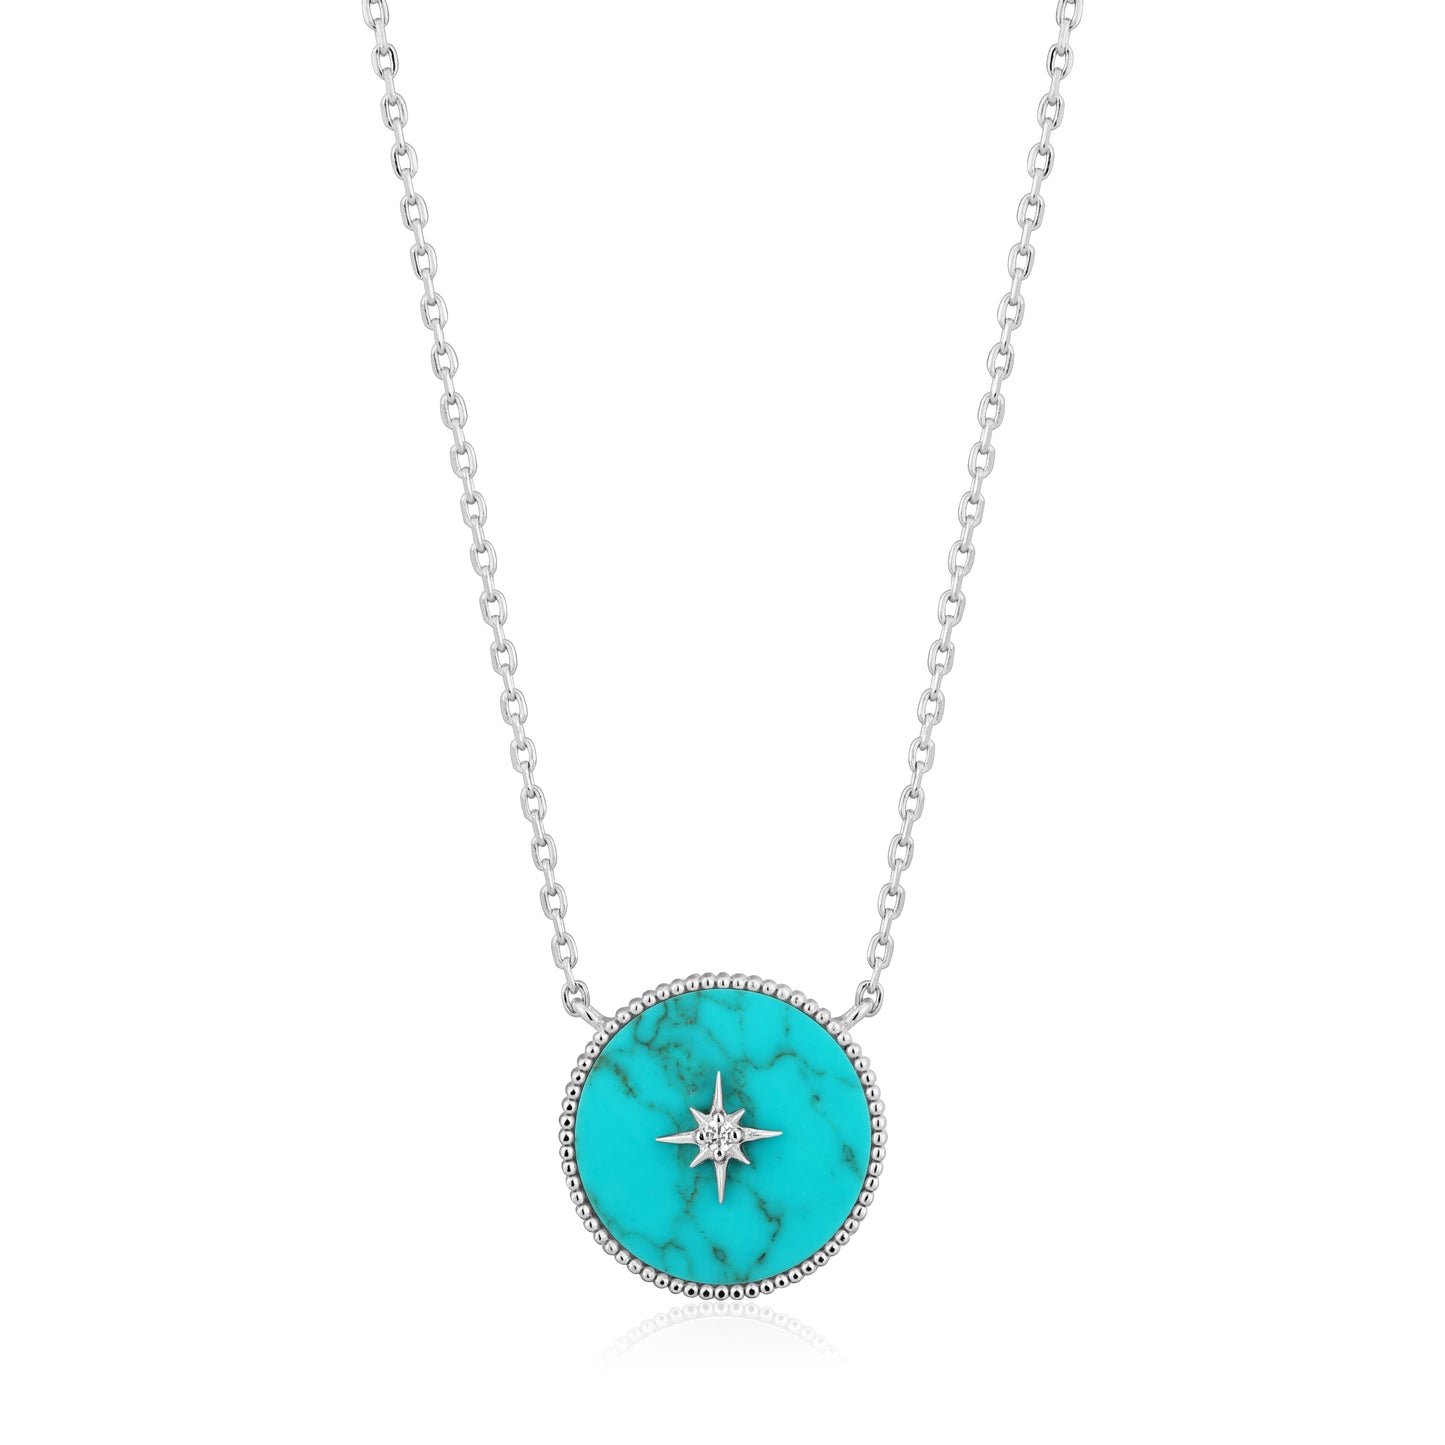 Ania Haie Turquoise Emblem Necklace - Silver Necklace